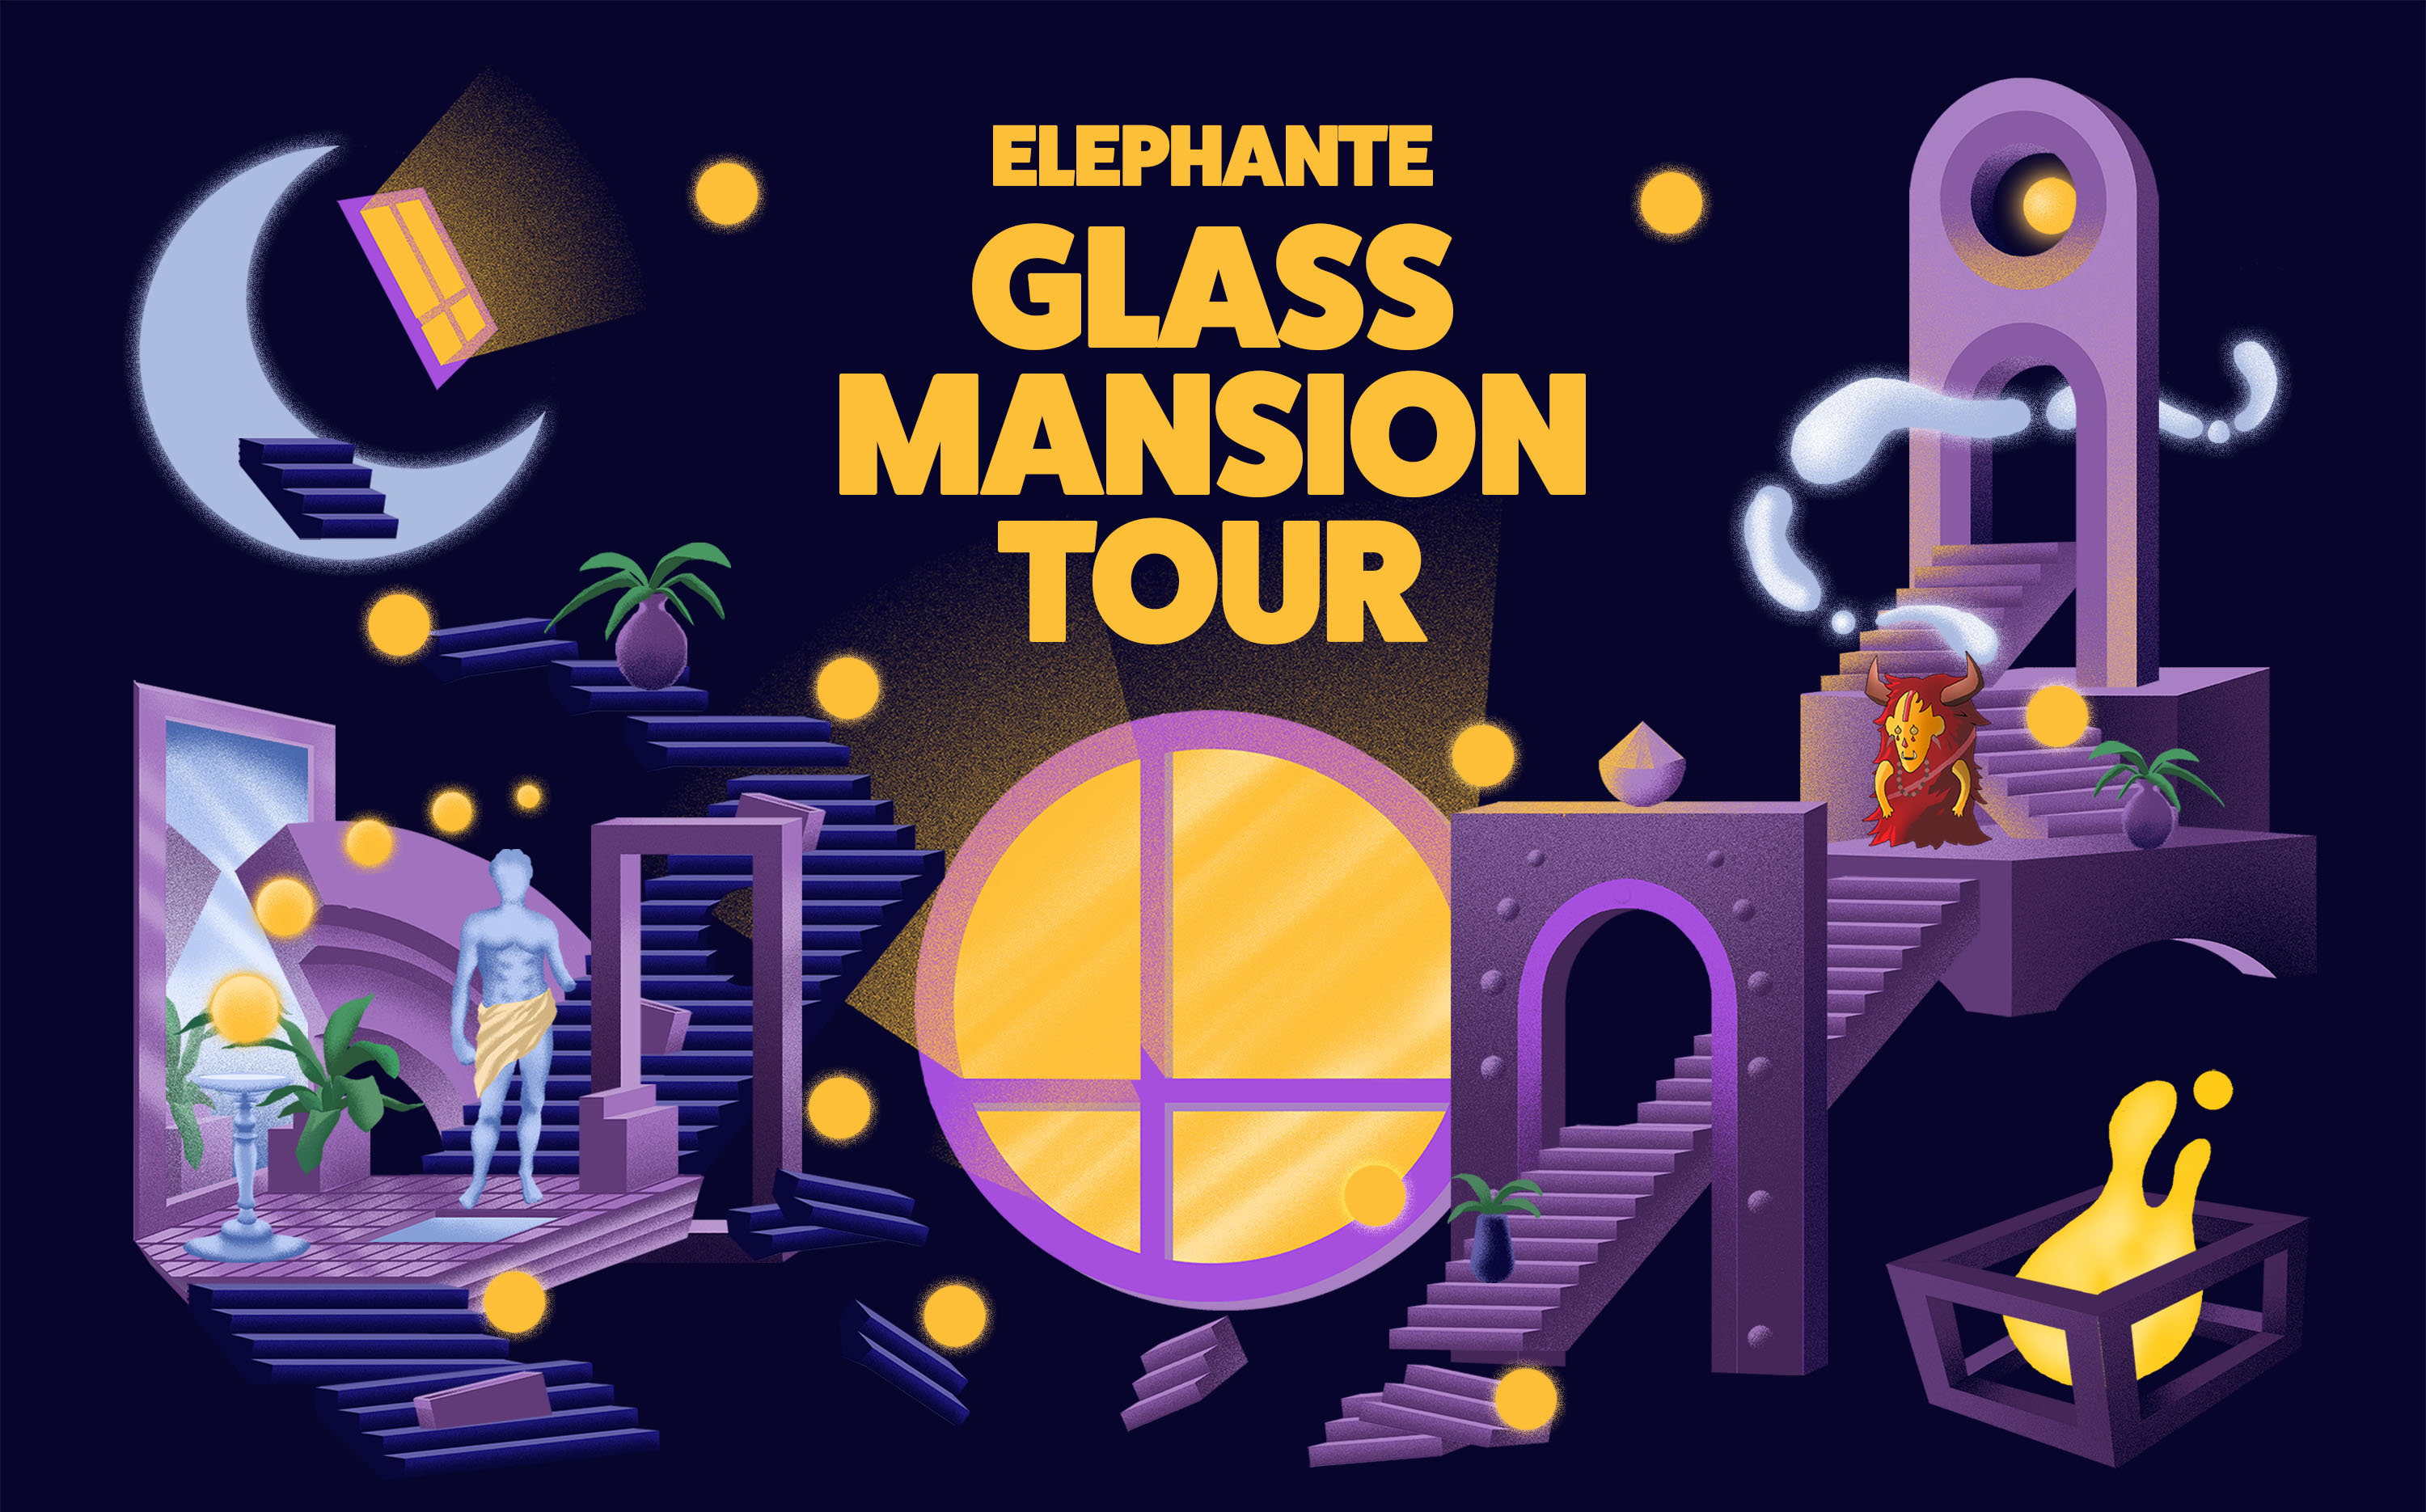 After kicking off the summer on the highest of notes with his nine-track sophomore project ‘Glass Mansion’, Elephante is gearing up to head back out on a fully packed fall tour. PURCHASE: ELEPHANTE’S ‘GLASS MANSION’ FALL TOUR TICKETS With the EP immediately met to widespread critical acclaim and boasting over 10 million streams on Spotify in just a few short weeks, the Los Angeles native is seeking to expand on that by bringing his highly sought-after music to fans around the states, unleashing an innovative creative concept and unique production unlike anything he has ever done before. The undeniably extensive fall run spans 33 cities where Elephante will make stops across all corners of the United States. The multifaceted producer and DJ will make appearances at some of the season’s largest festivals including Moonrise Festival, Breakaway Festival and Prime Music Festival in addition to reigniting his annual residency at Hakkasan in Las Vegas. Additional performances include stops in Atlantic City, New York, Portland, Los Angeles, Philadelphia and many more. There are also a handful of unannounced shows thrown into the mix so fans who unfortunately see their city missing may be in luck in the coming weeks as more information is revealed. STREAM: ELEPHANTE – GLASS MANSION Since the start of the summer of 2017, Elephante has taken the decks on the stage at over 20 of the planet’s most attended festivals including EDC Las Vegas, Electric Zoo, Sunset Music Fest in Tampa and many more. His ‘Glass Mansion’ EP hit the #1 spot on iTunes’ Dance chart following its release this past June and Elephante is surely looking to keep his heavy momentum rolling in the coming months. Tickets for his ‘Glass Mansion’ fall run are officially on sale now so fans can start their preparation ahead of its kickoff show next weekend at Hakkasan.